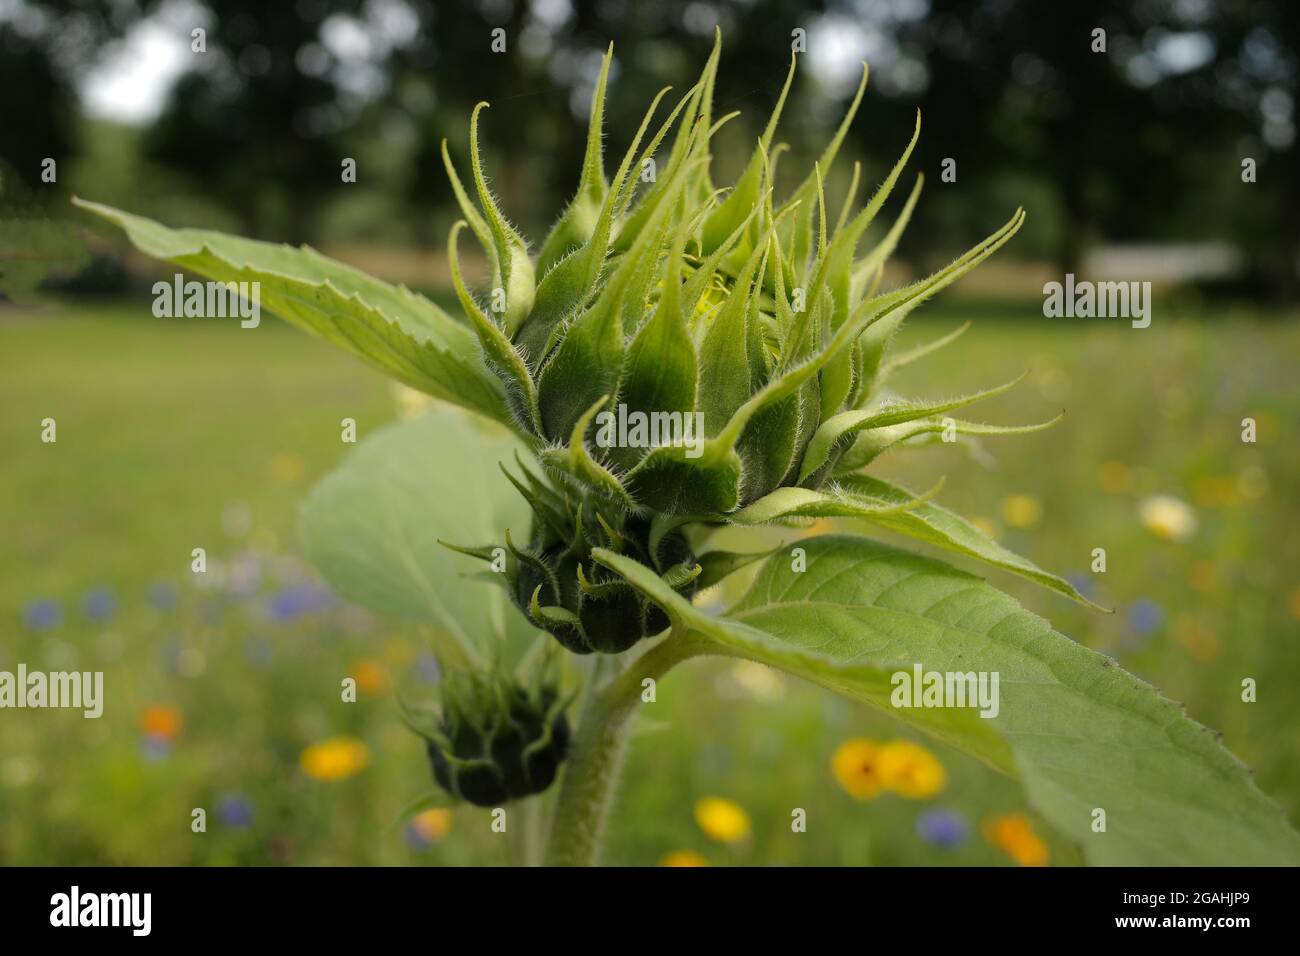 The buds of a sunflower  in a flower meadow. The other flowers and a lane of dark green trees are blurred in the background. Stock Photo